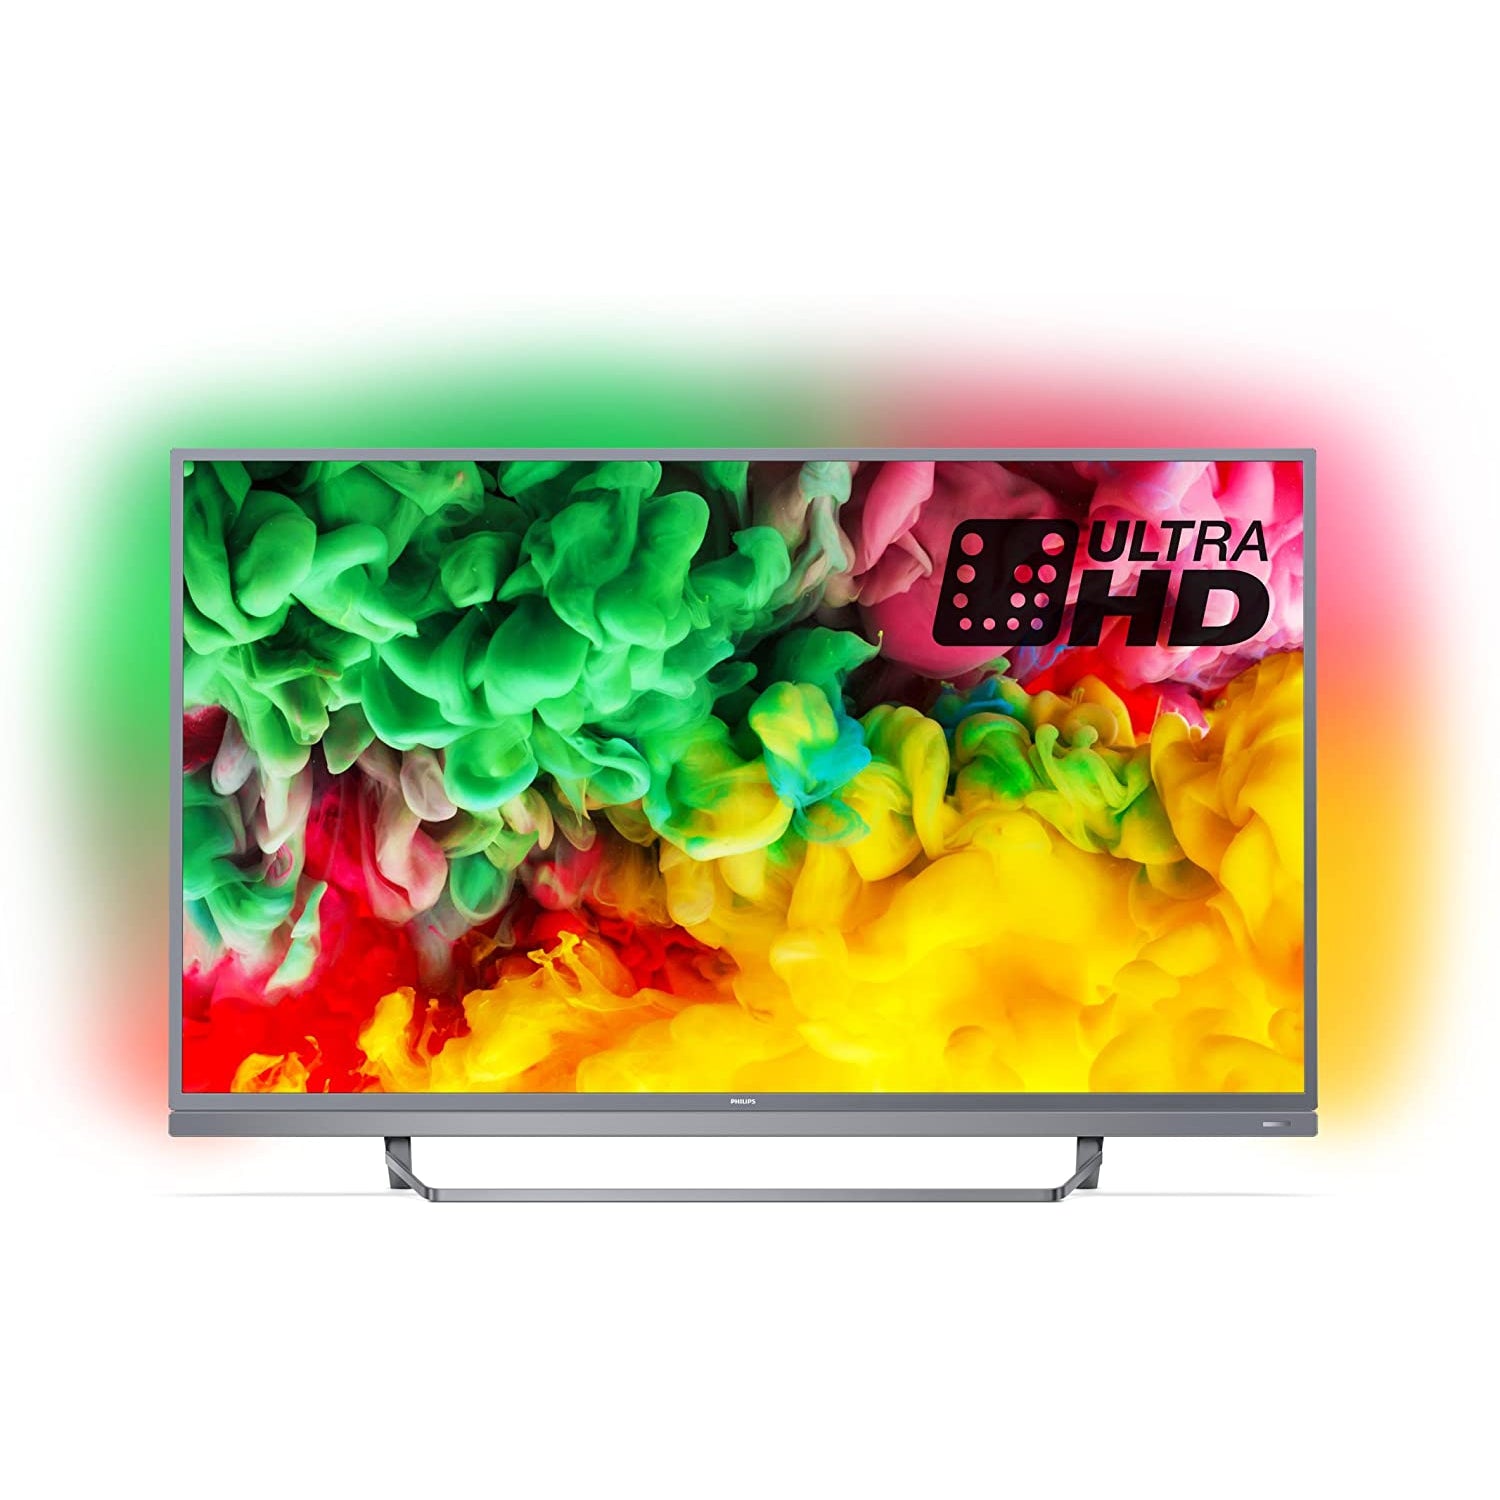 Refurbished Philips 55PUS6803/12 55-Inch 4K Ultra HD Smart TV with HDR Plus, Freeview Play and 3-sided Ambilight - Dark Silver (2018 Model)